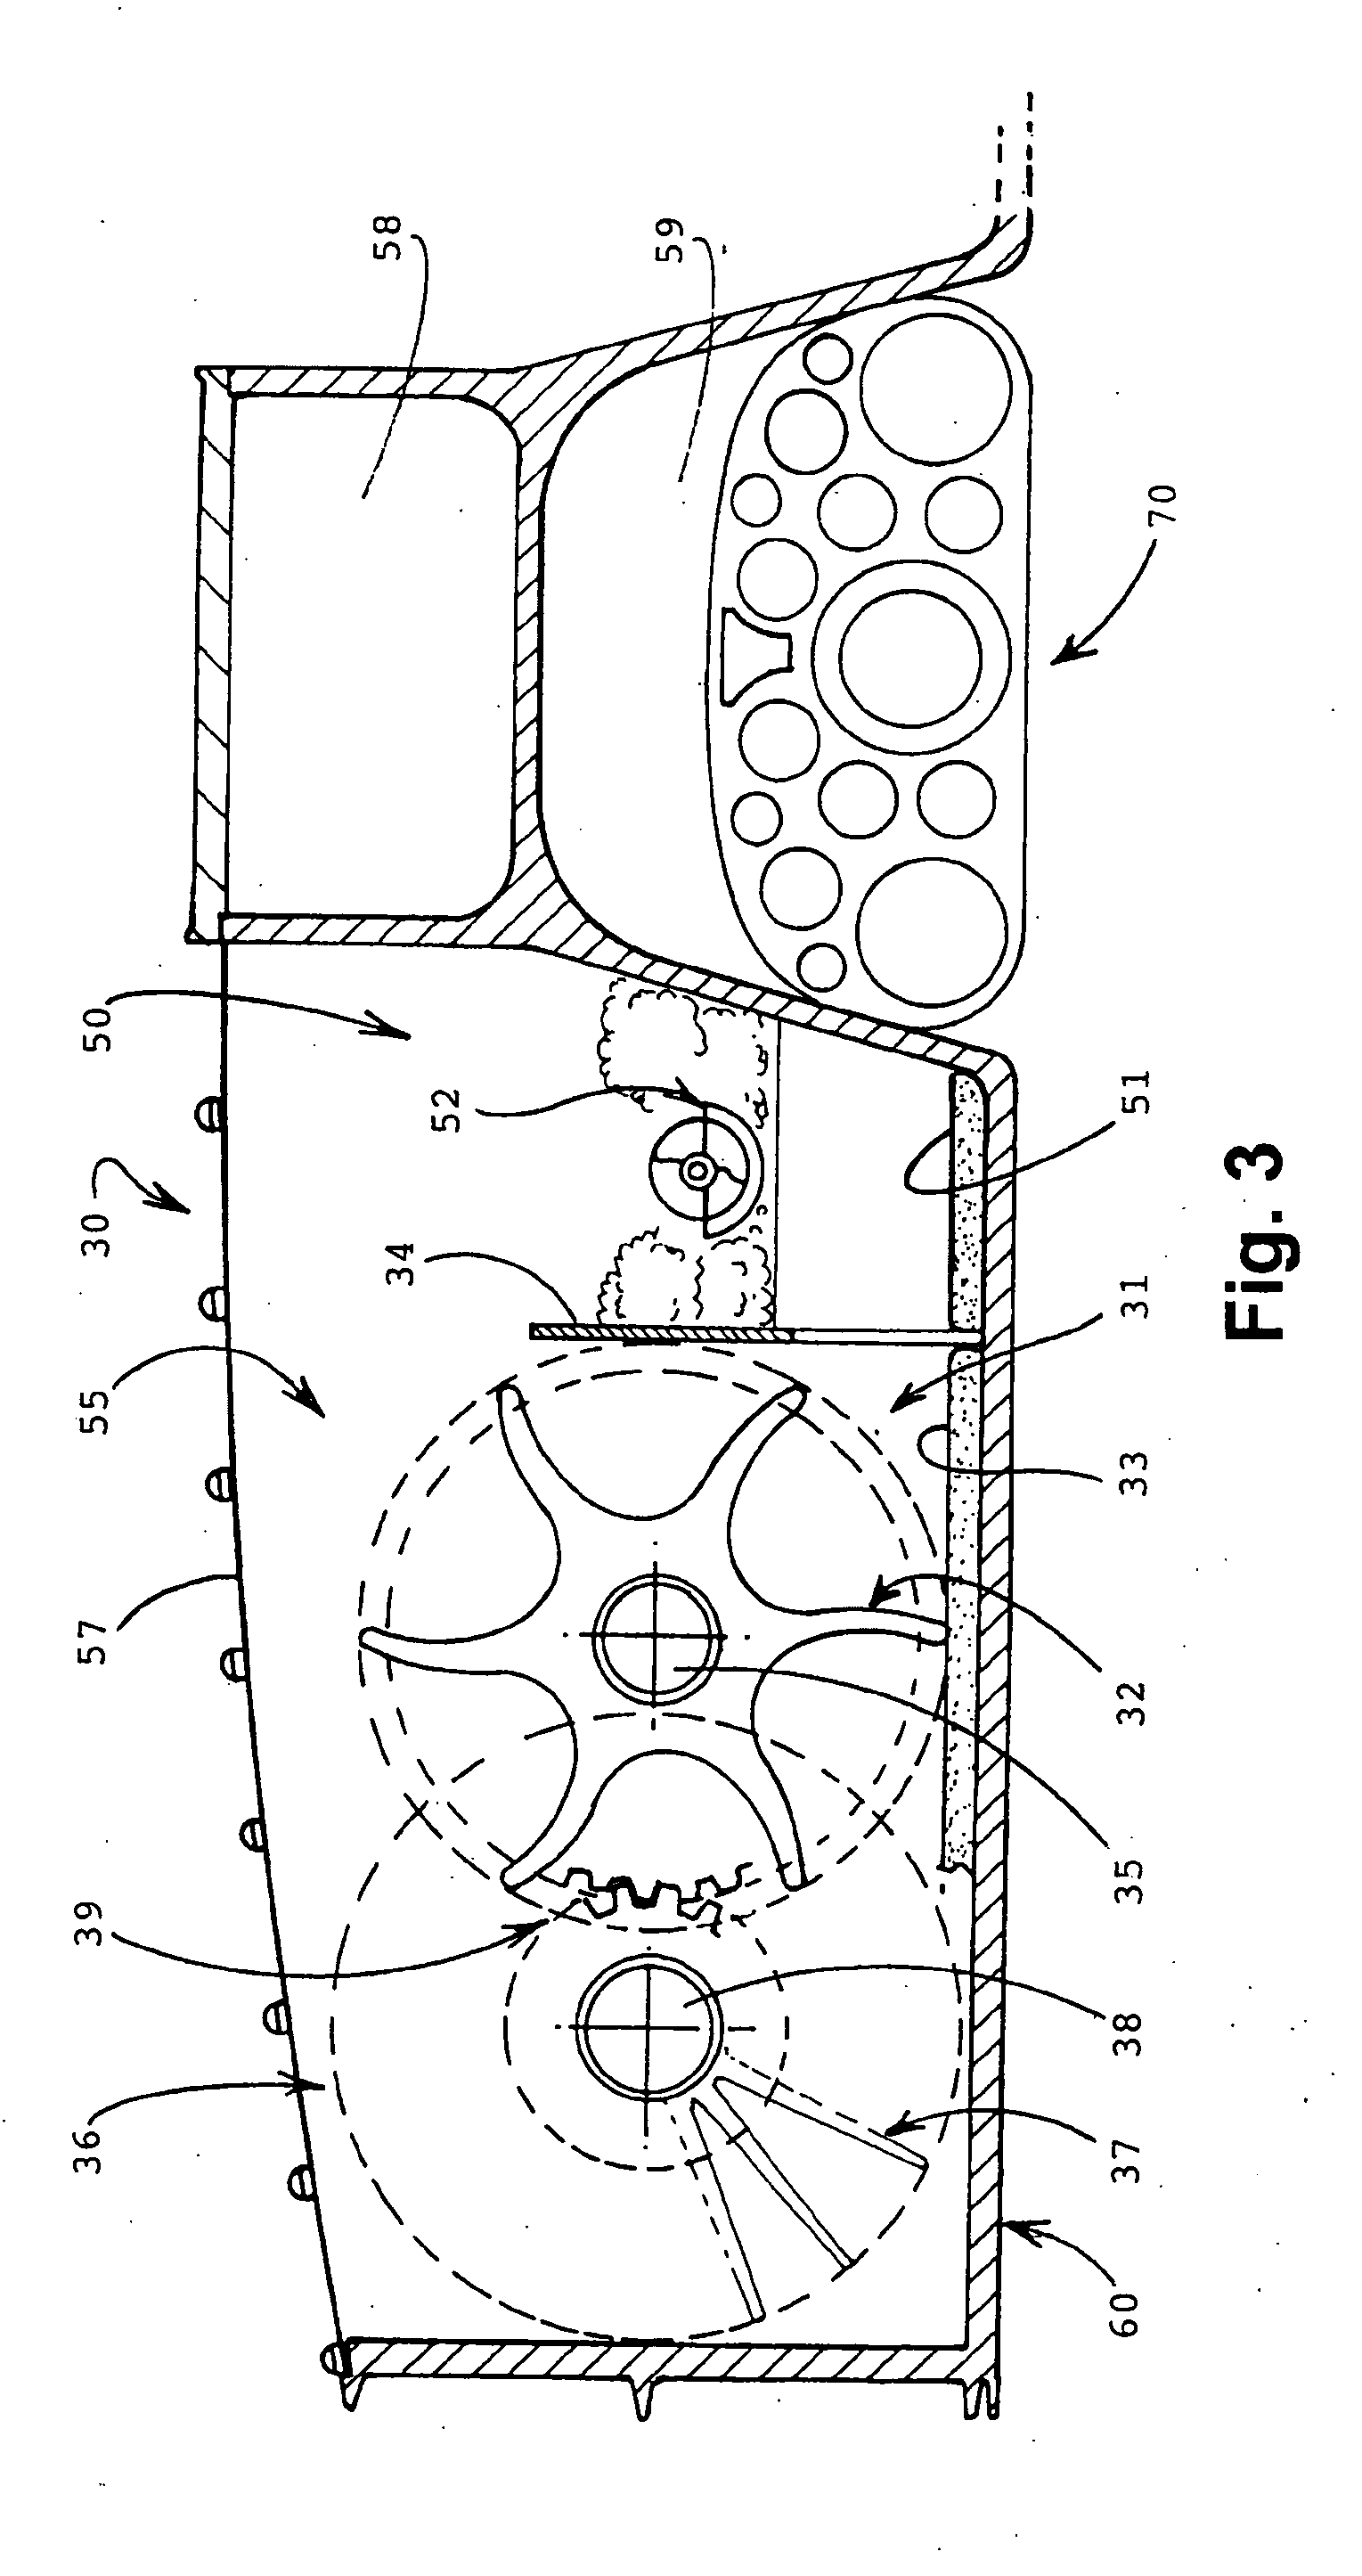 System for cultivation and processing of microorganisms, processing of products therefrom, and processing in drillhole reactors